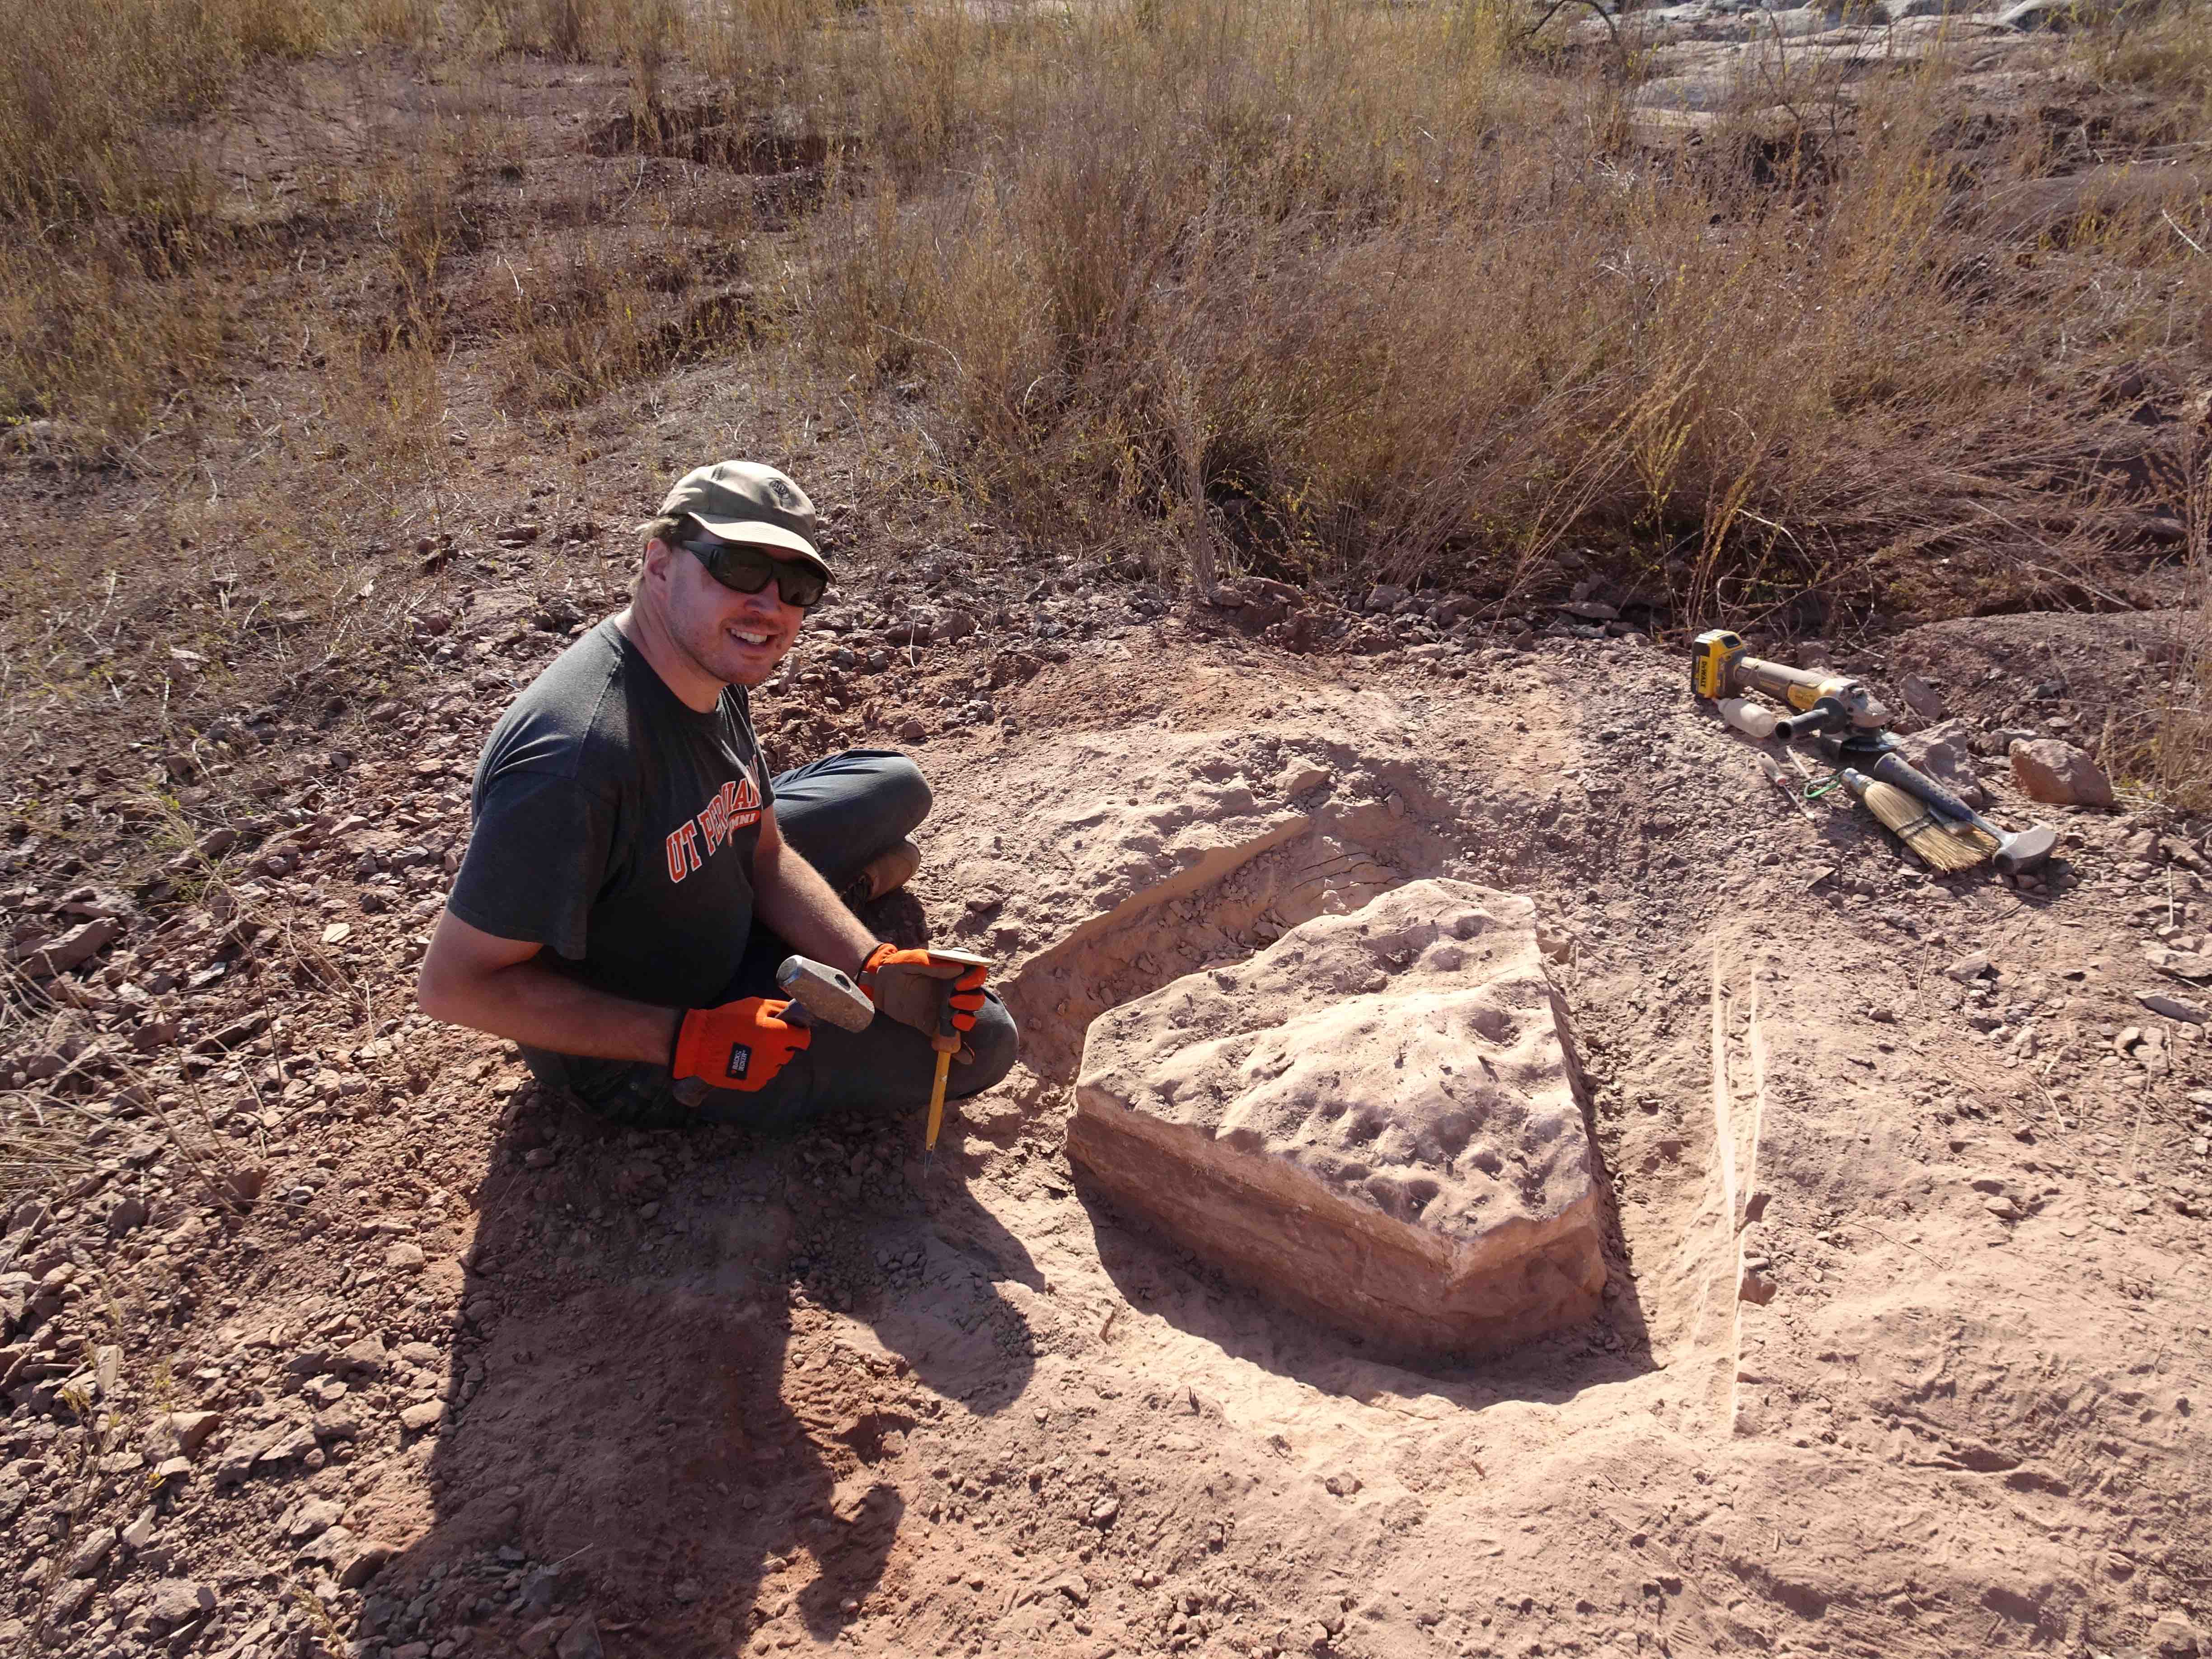 Dr. Kammerer excavating the skull of a dicynodont therapsid from Triassic deposits in North Carolina.